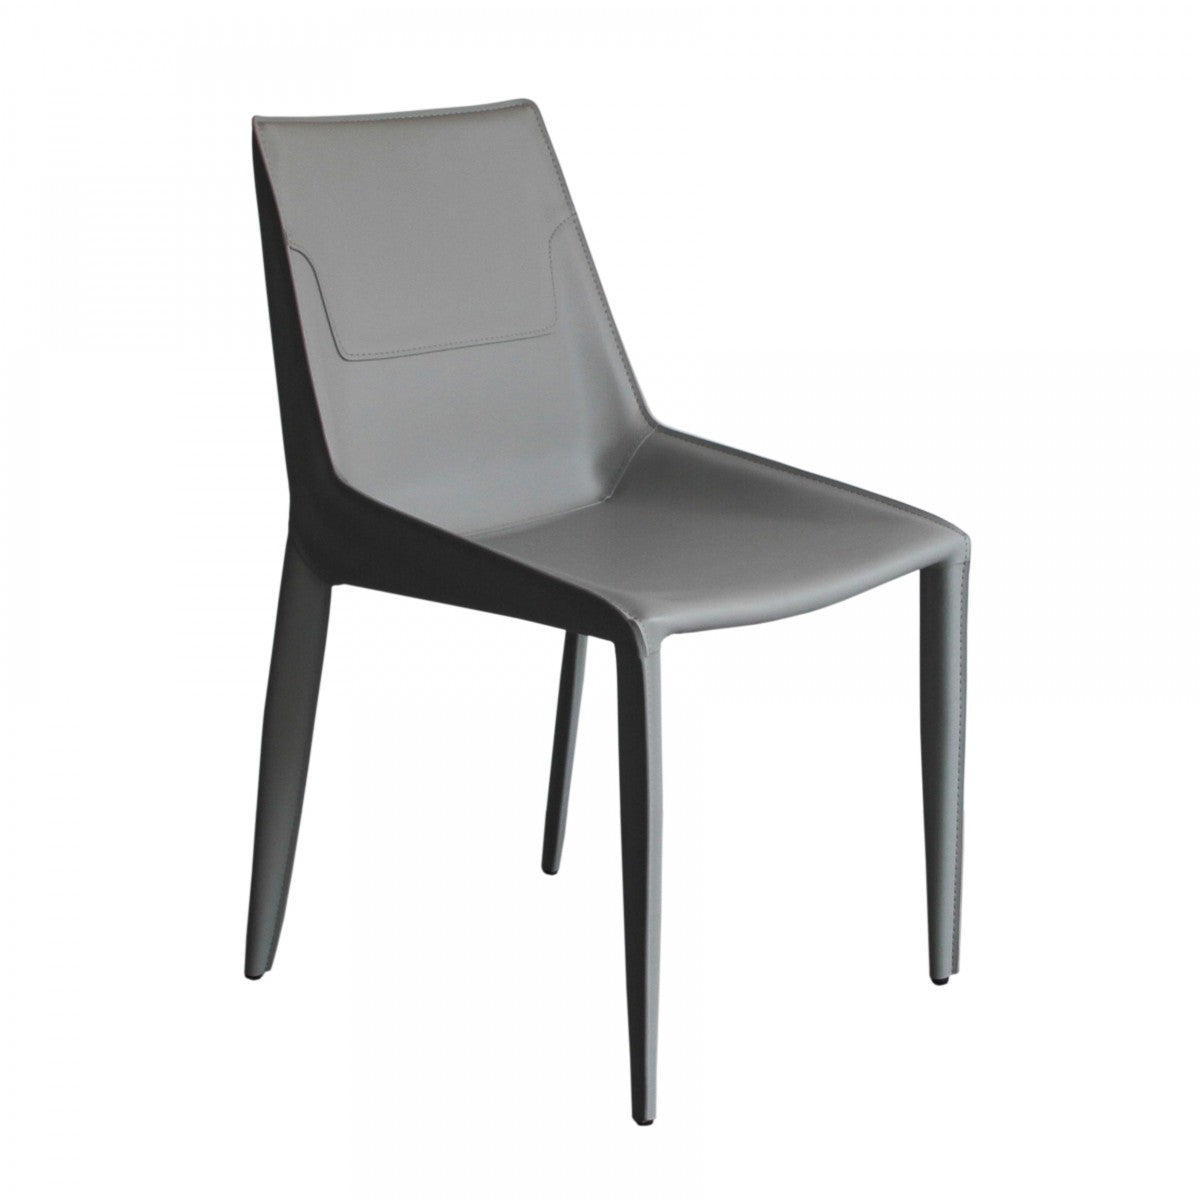 Modrest Halo - Modern Light Grey Saddle Leather Dining Chair Set of Two